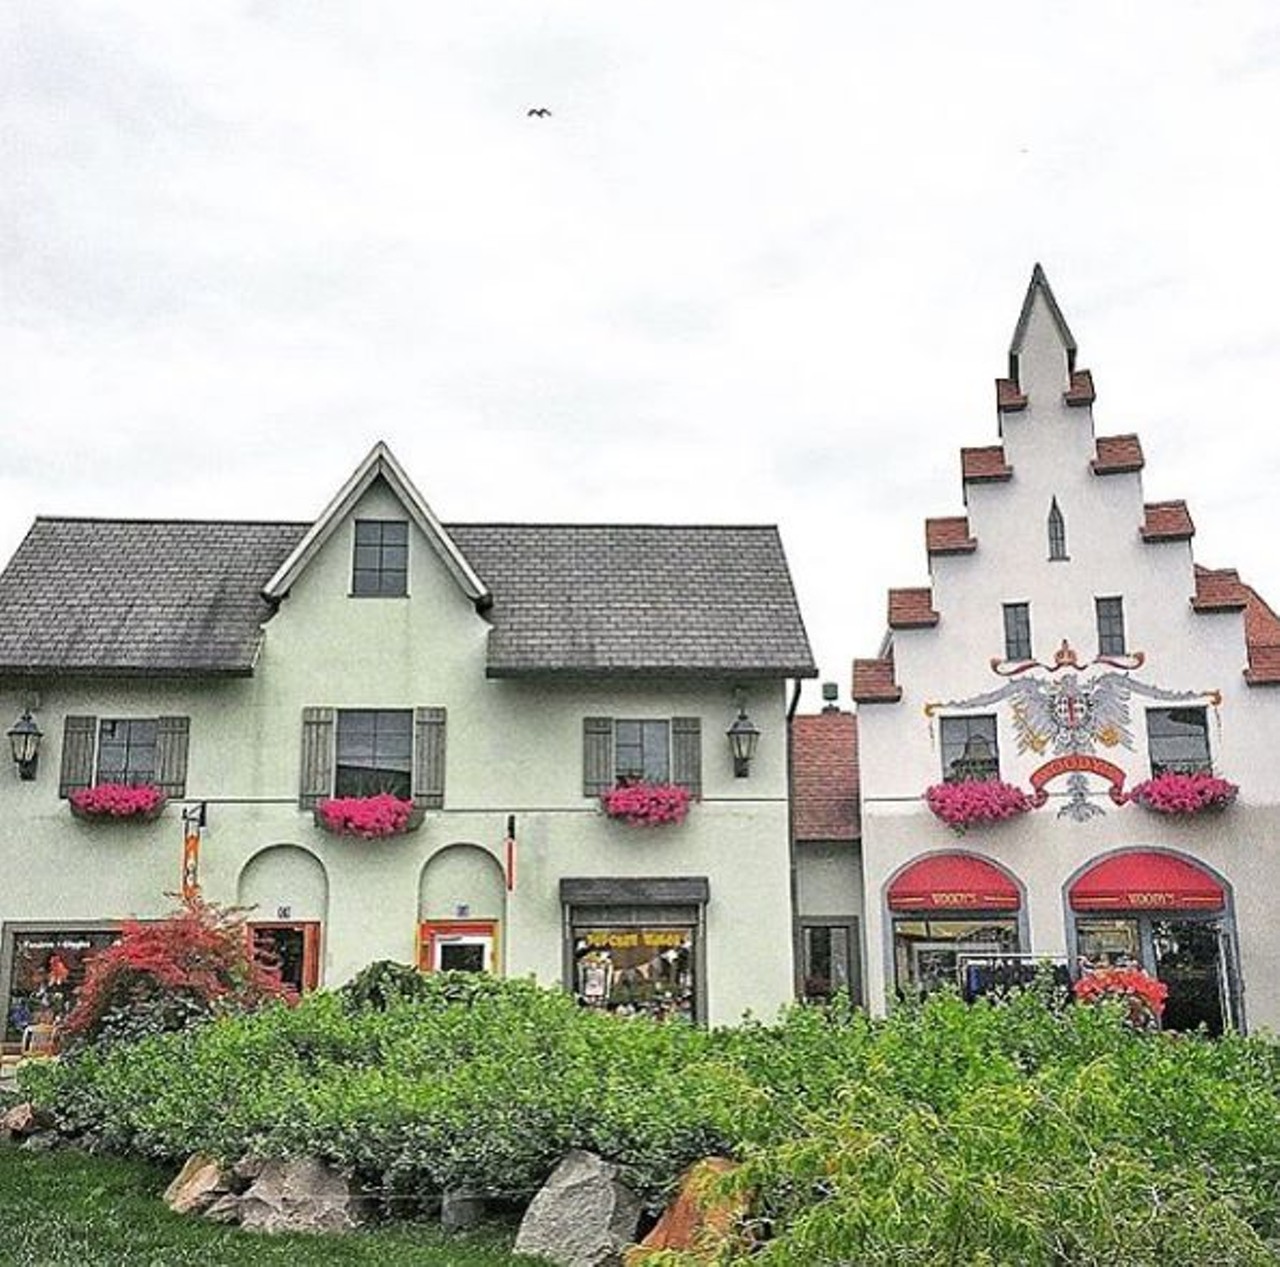 Frankenmuth
Driving distance from Detroit: 1 hour and 29 minutes
With roots in German culture, the city is best known for their &#147;Bavarian hospitality&#148;. Come with an appetite because the restaurants will be serving large portions of chicken, mashed potatoes and other comfort foods. Besides food there is a ton going on here, festivals all the time, indoor waterparks, shops and a great culture different than the rest of the state.
Photo via @calecica1